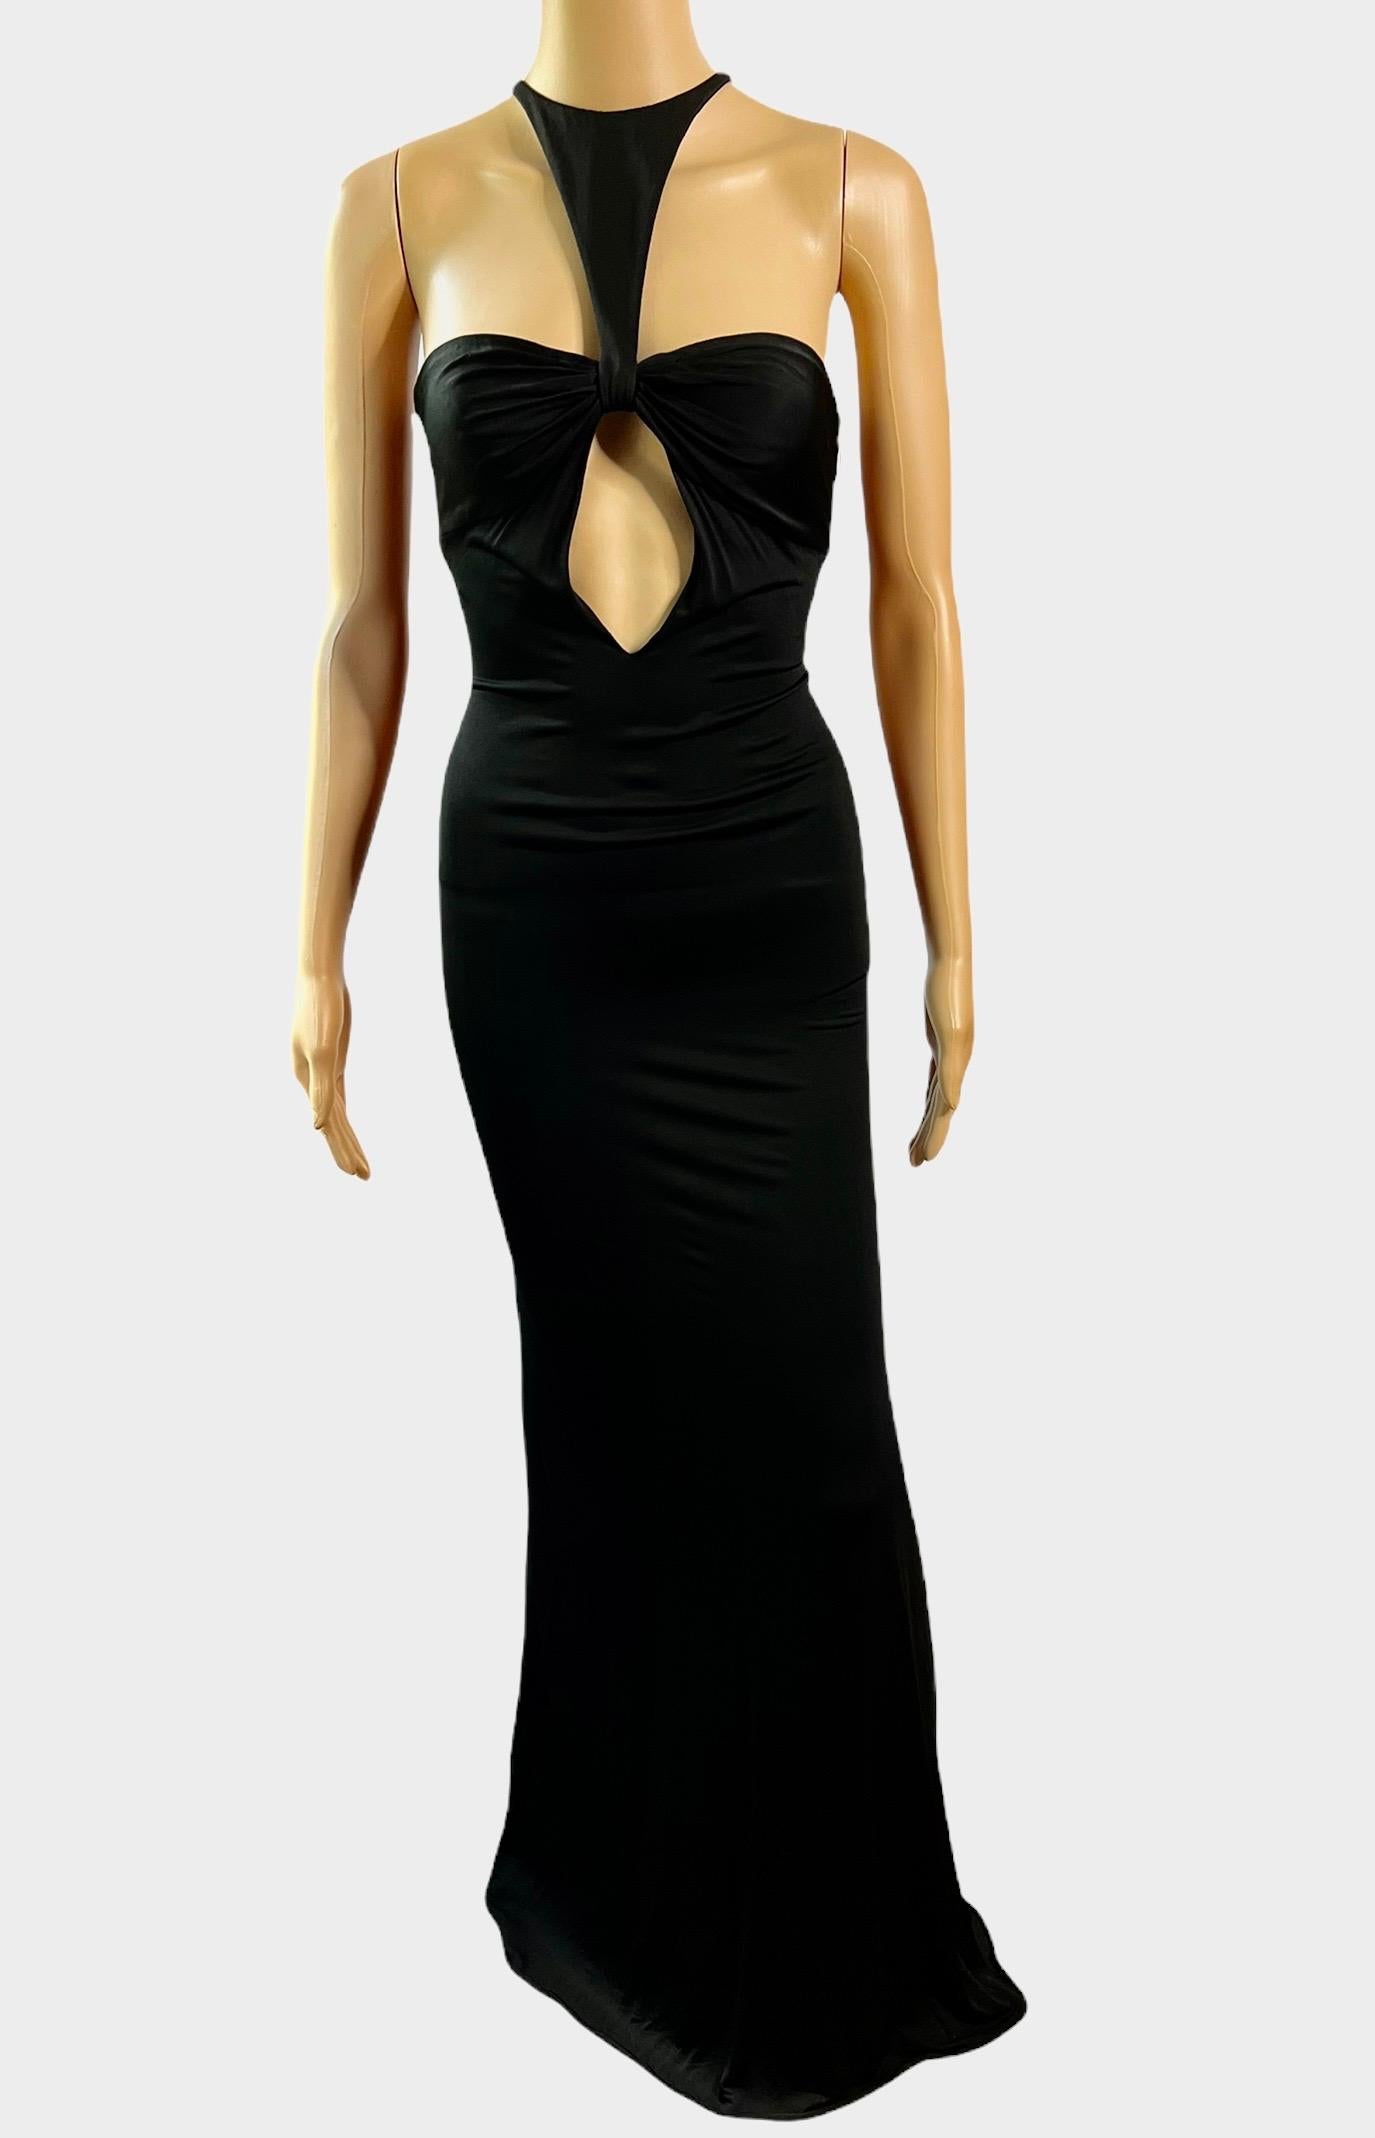 Tom Ford for Gucci F/W 2004 Plunging Cutout Black Evening Dress Gown 2